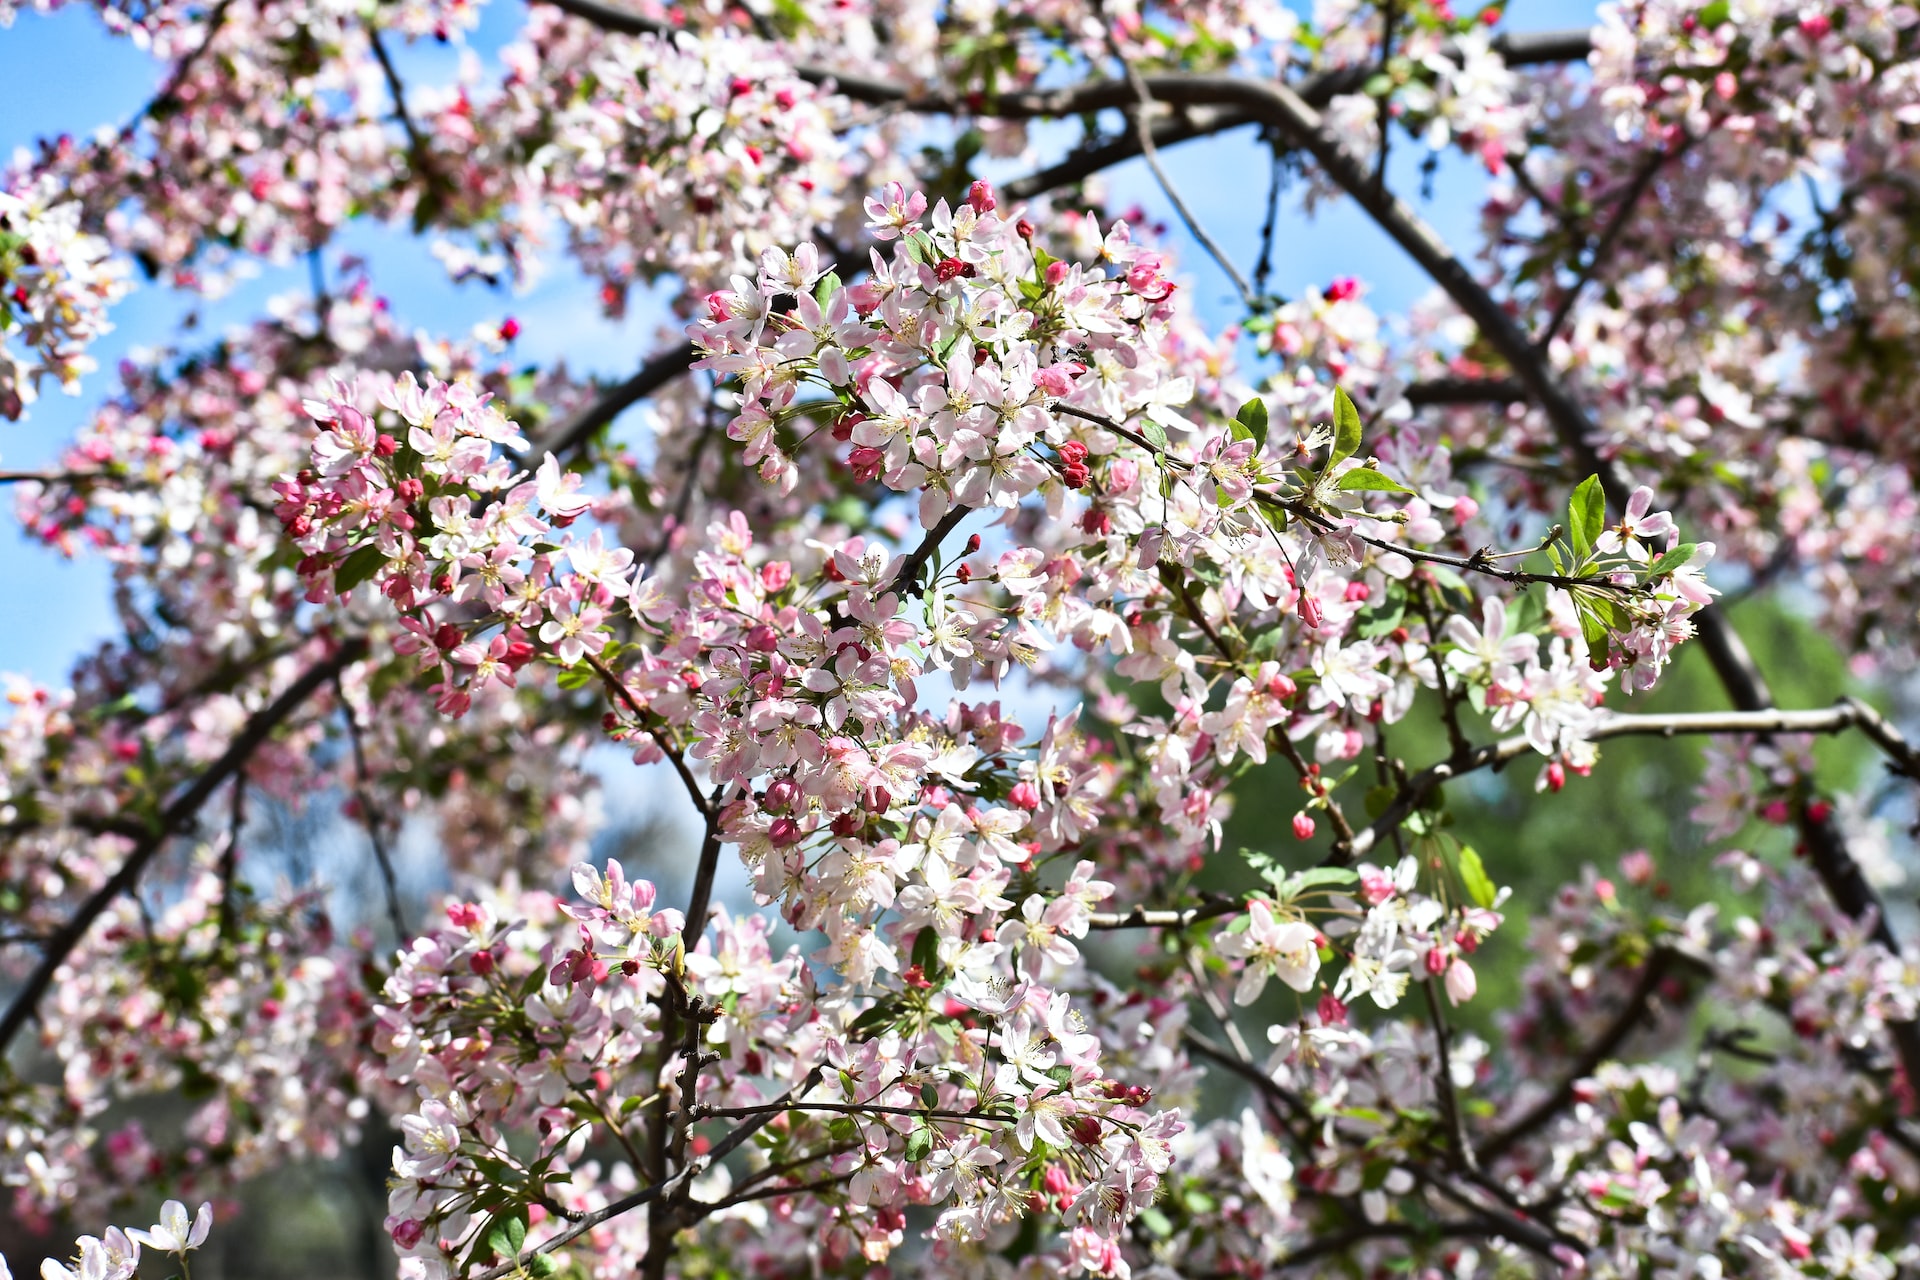 Experience the Beauty of Cherry Blossoms in Washington, D.C.: Travel Guide